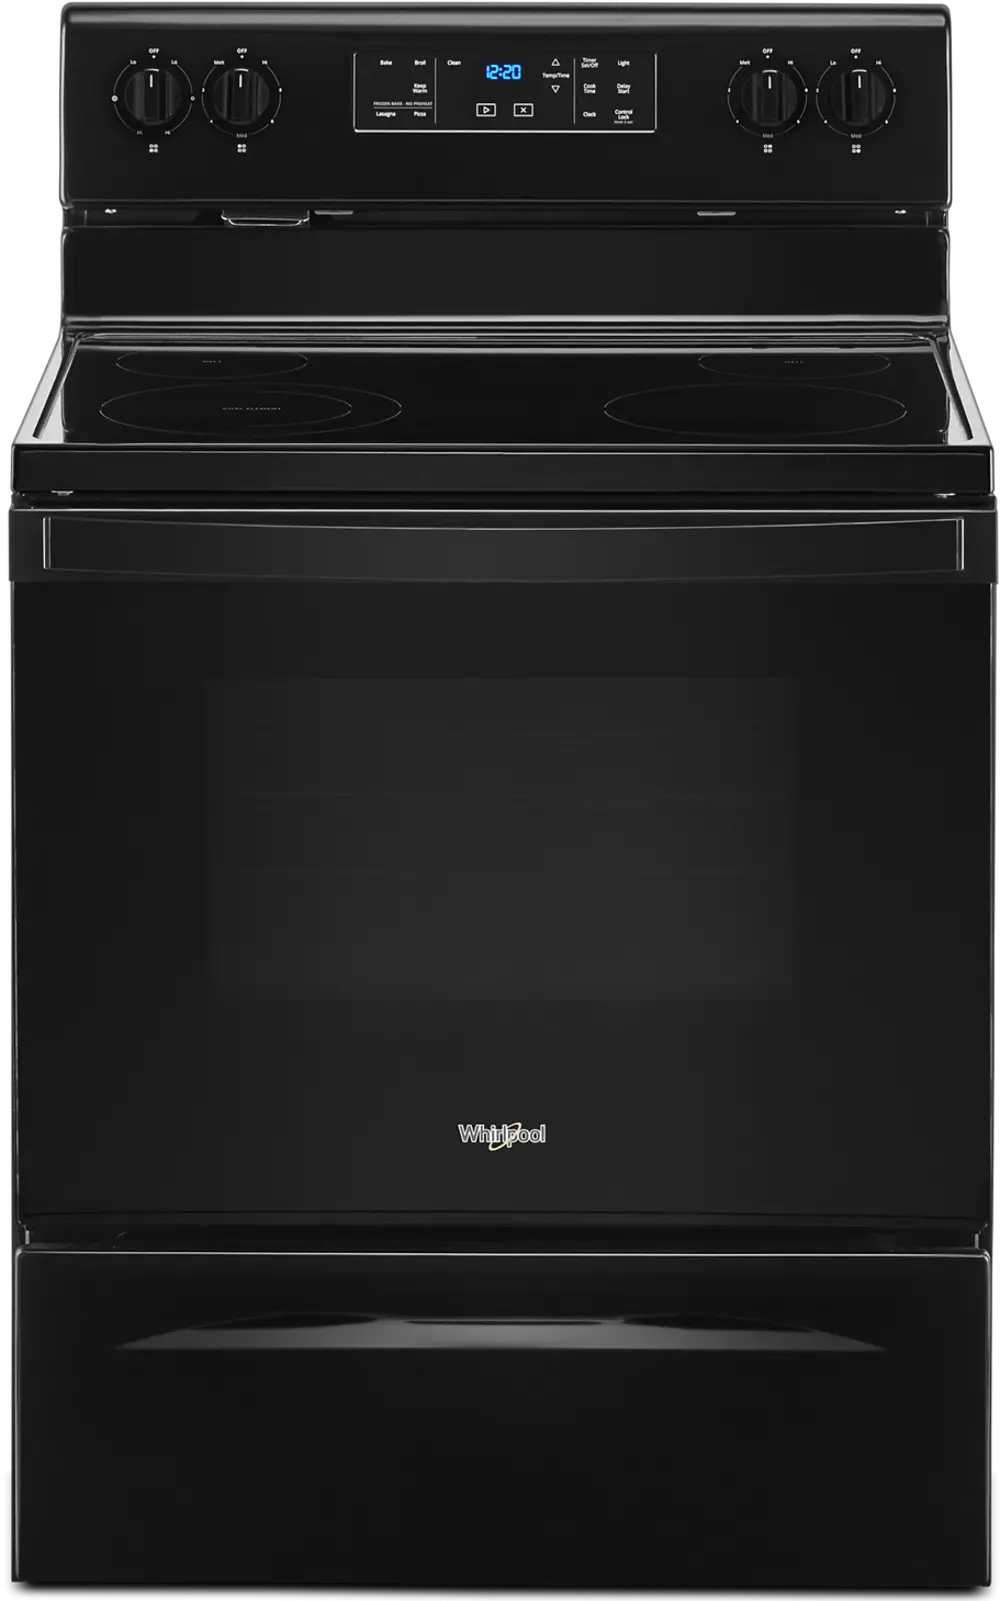 WFE515S0JB Whirlpool 5.3 cu. ft. Electric Range with Dual Radiant Element - 30 Inch Black-1